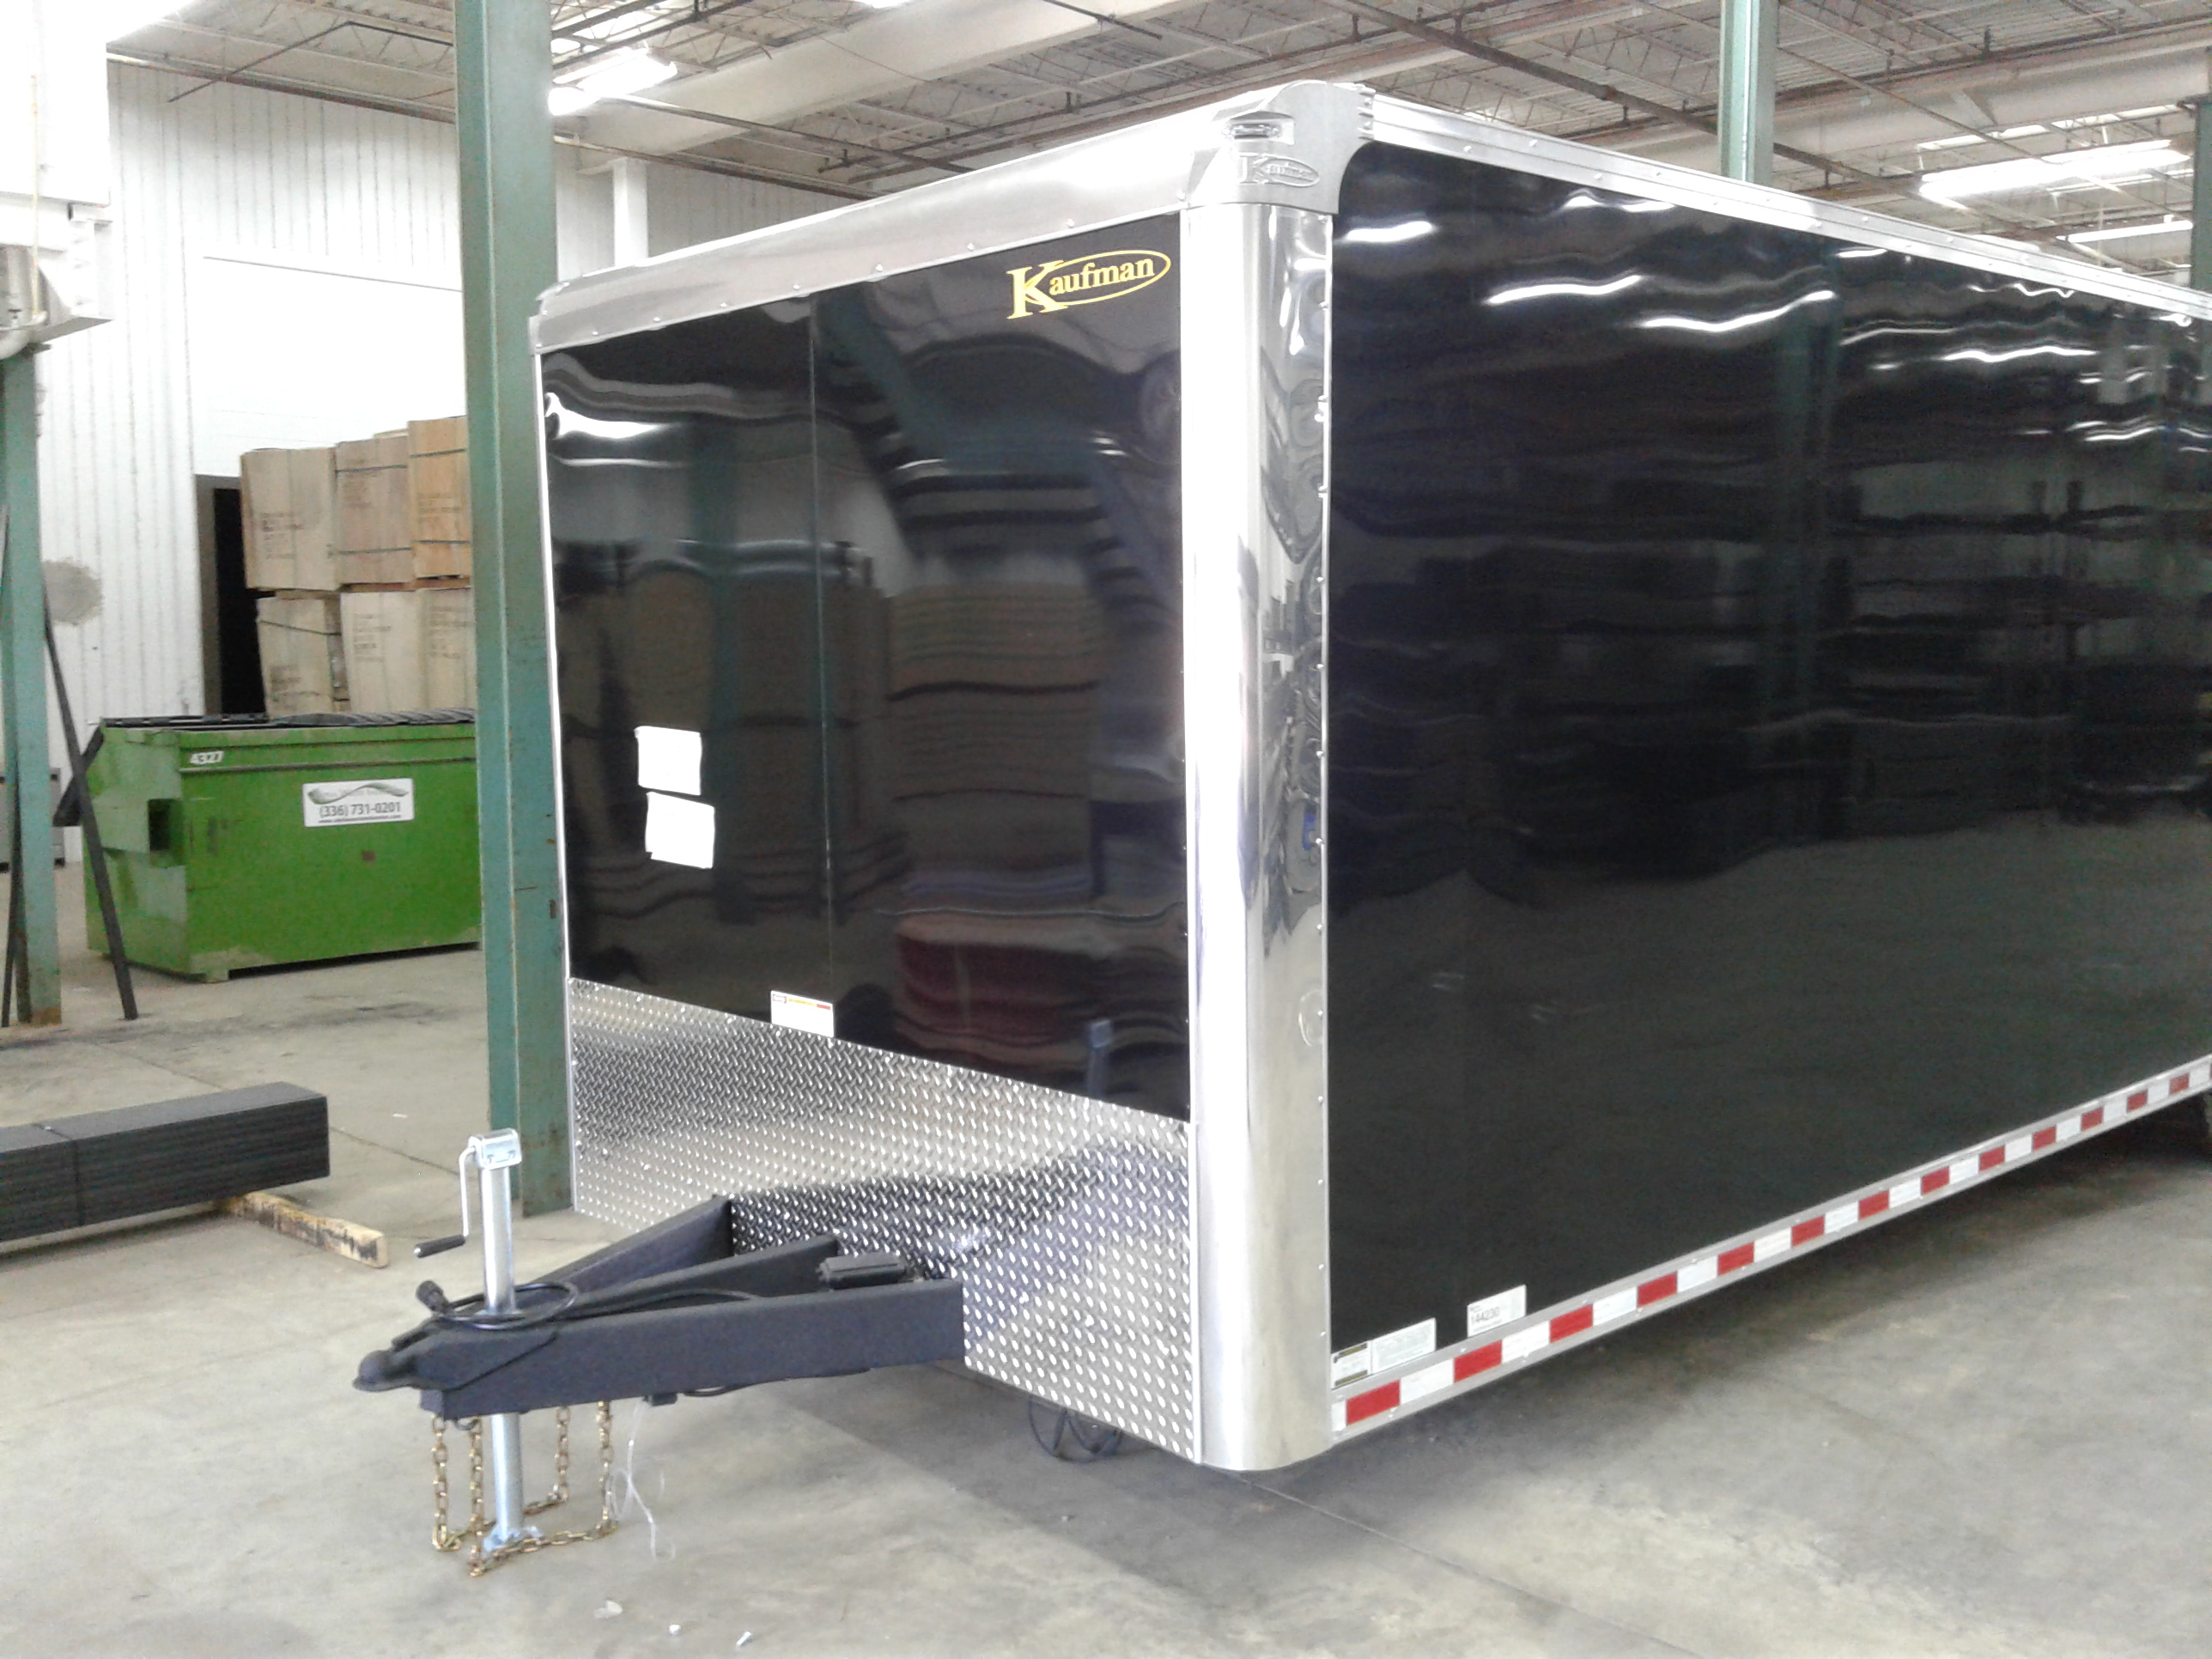 Enclosed Car Haulers For Sale By Kaufman Trailers!